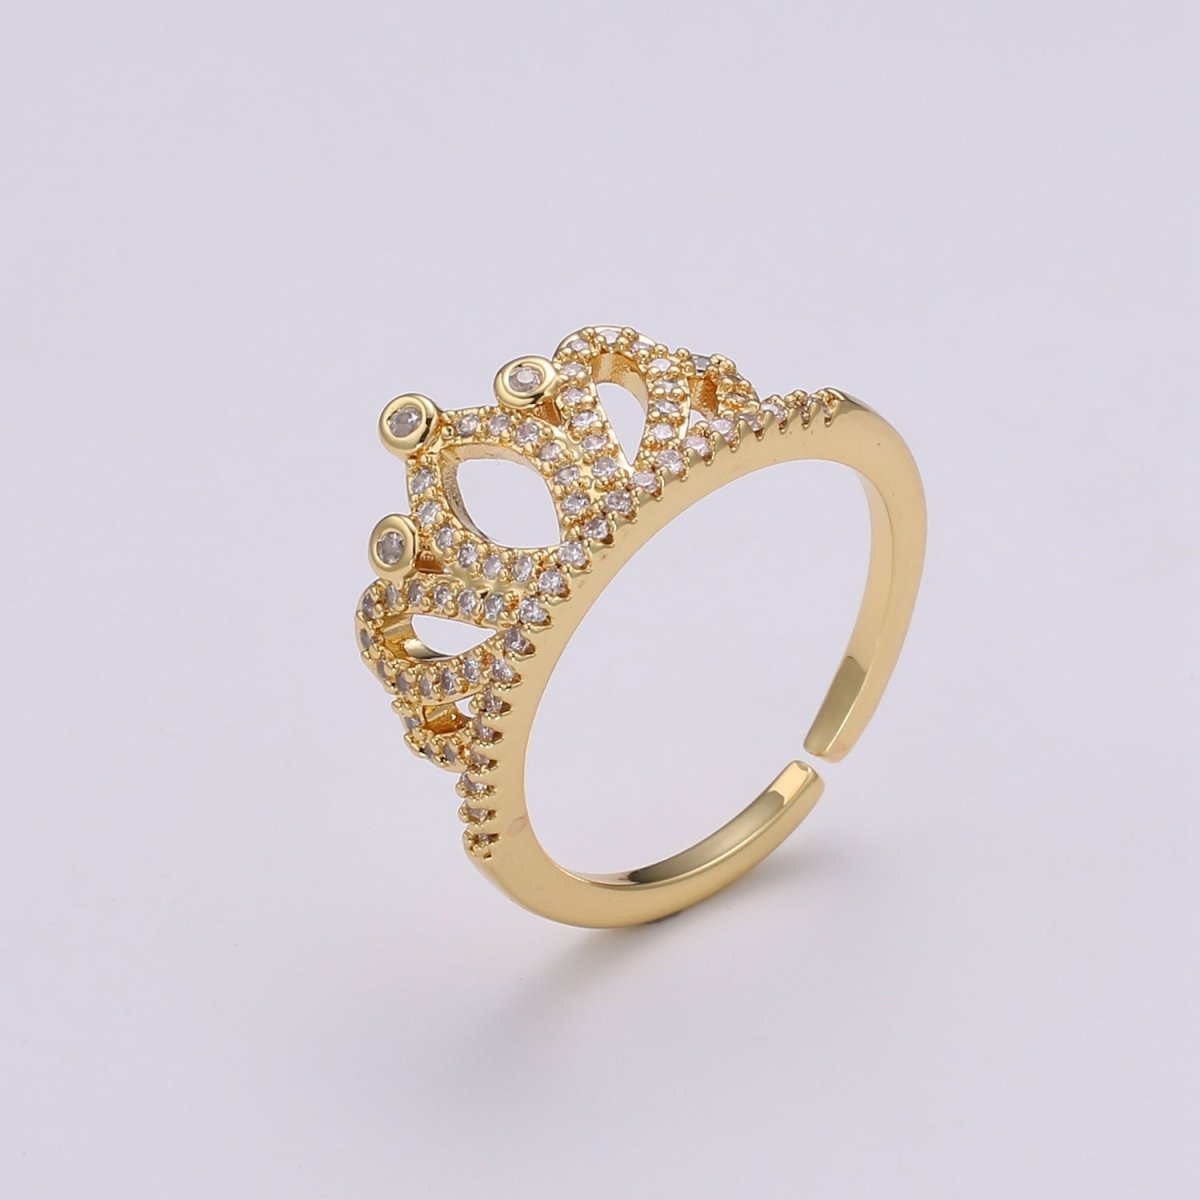 Crown Cubic Mini Pendant, Queen Cubic Pave 24K Gold Plated Charm Ring, Solitaire CZ Pendant Double Ring, Dainty ring Charm, R-440 - DLUXCA